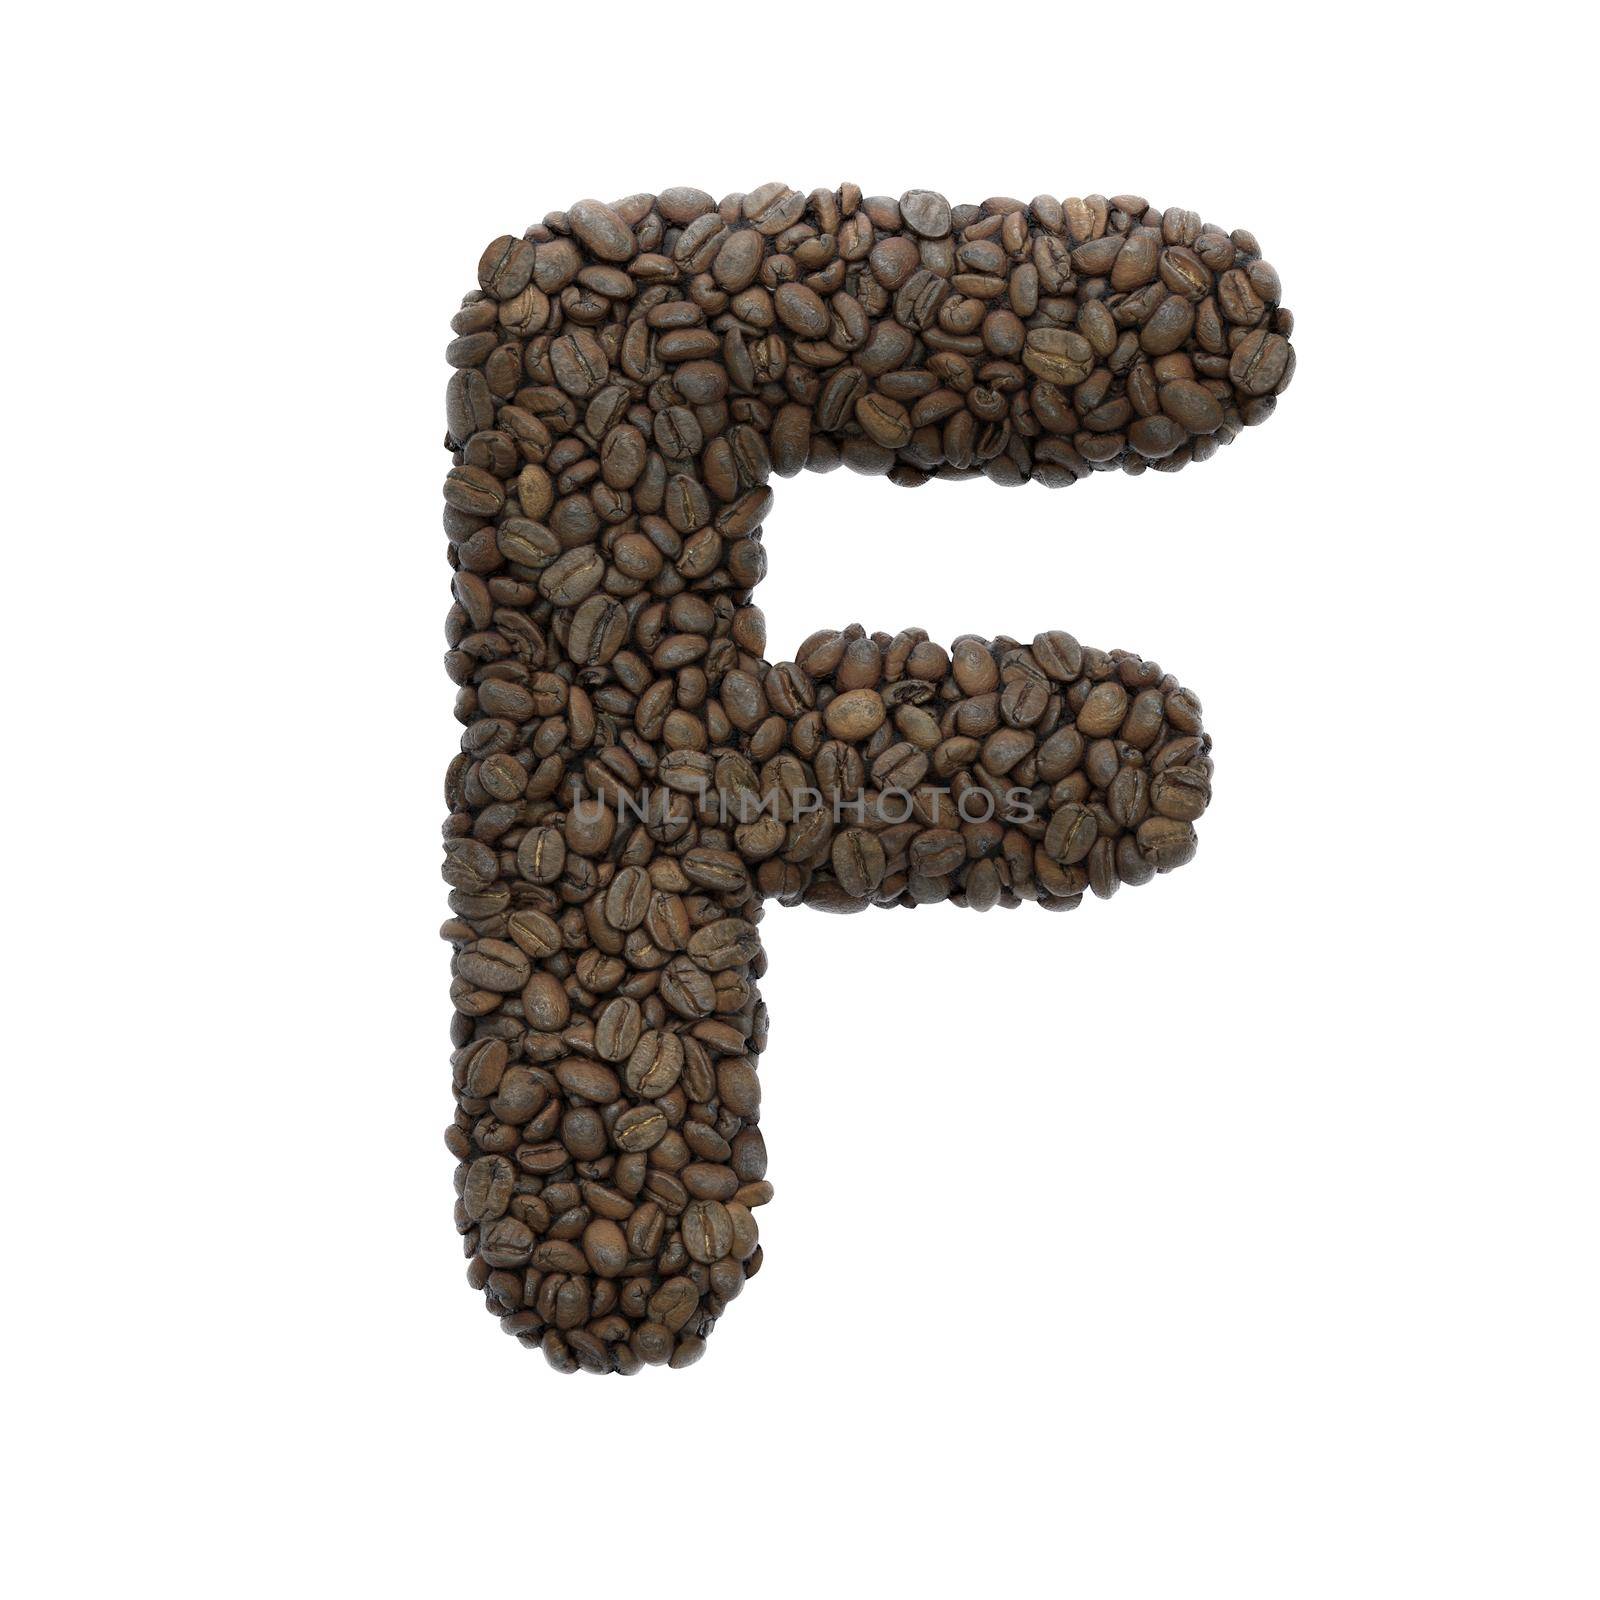 Coffee letter F - Upper-case 3d roasted beans font - suitable for Coffee, energy or insomnia related subjects by chrisroll